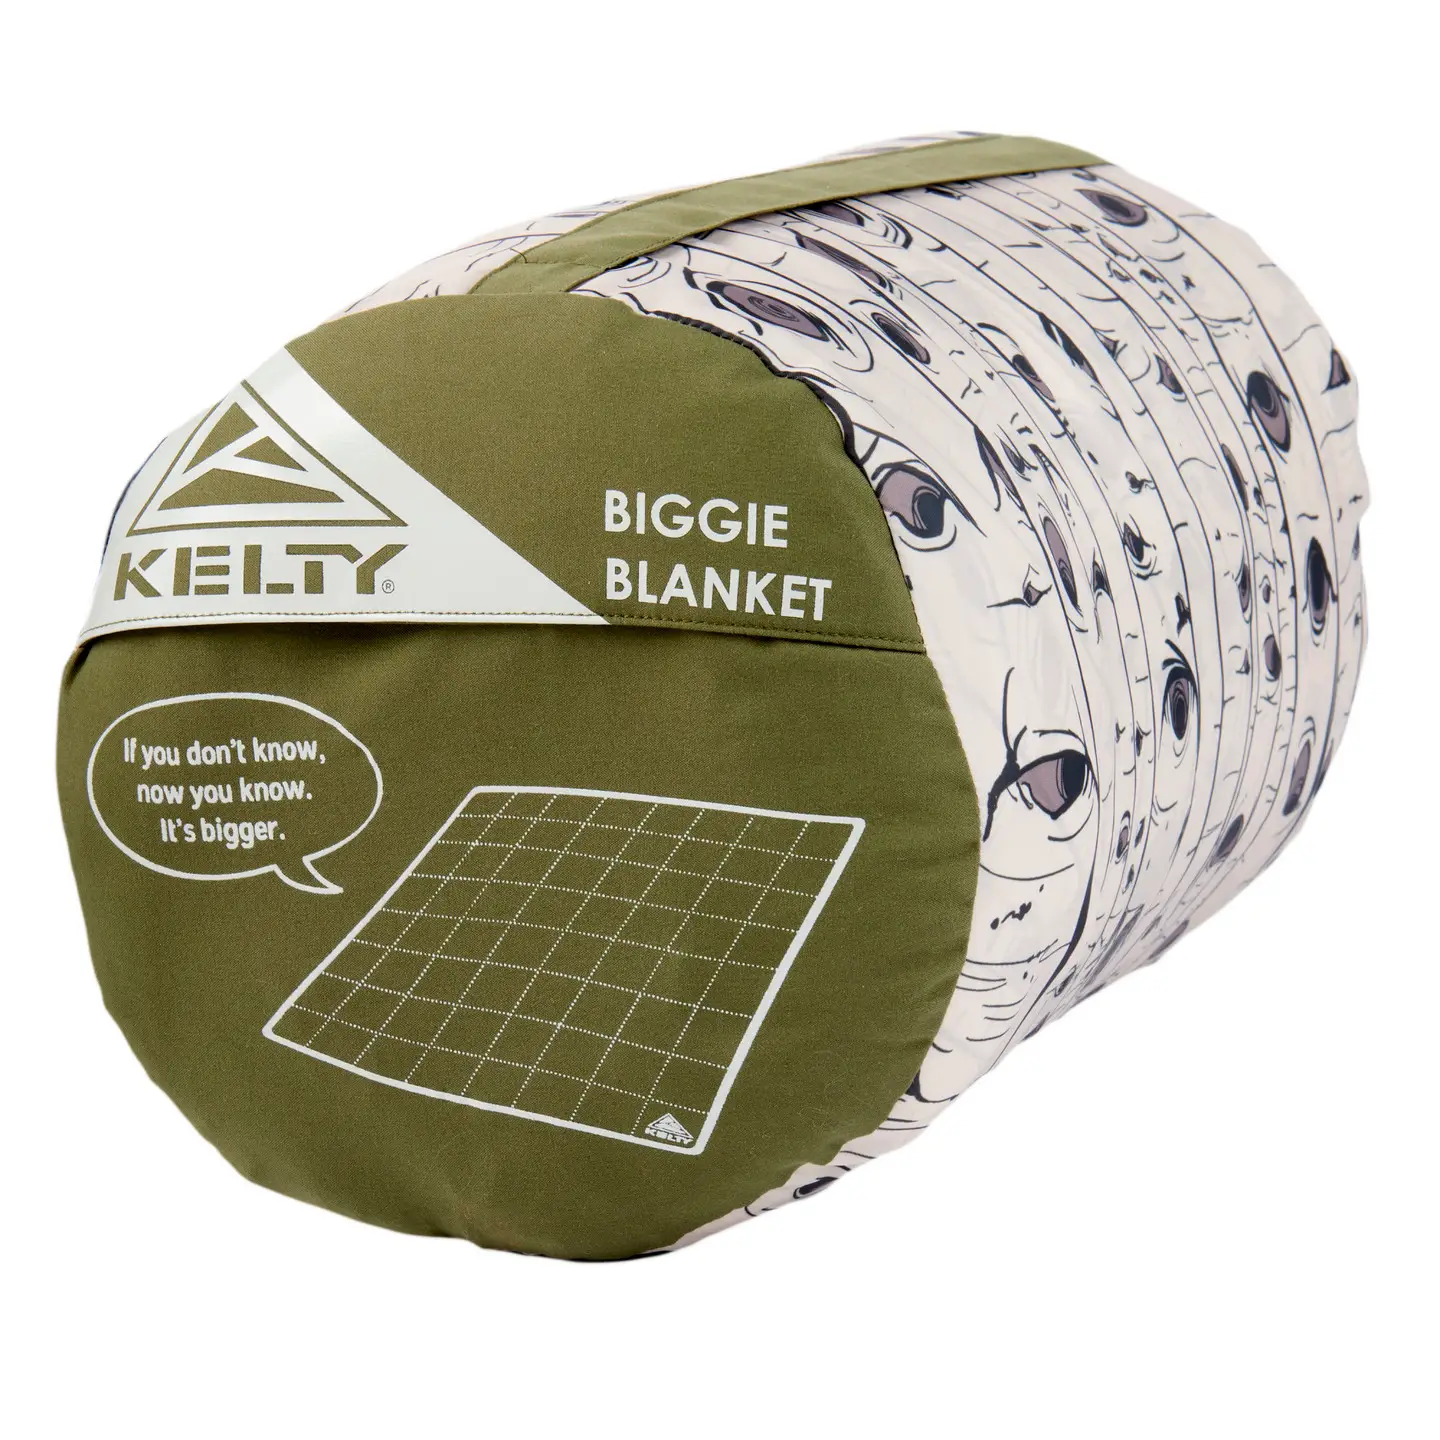 Kelty ground cover rolled up in case